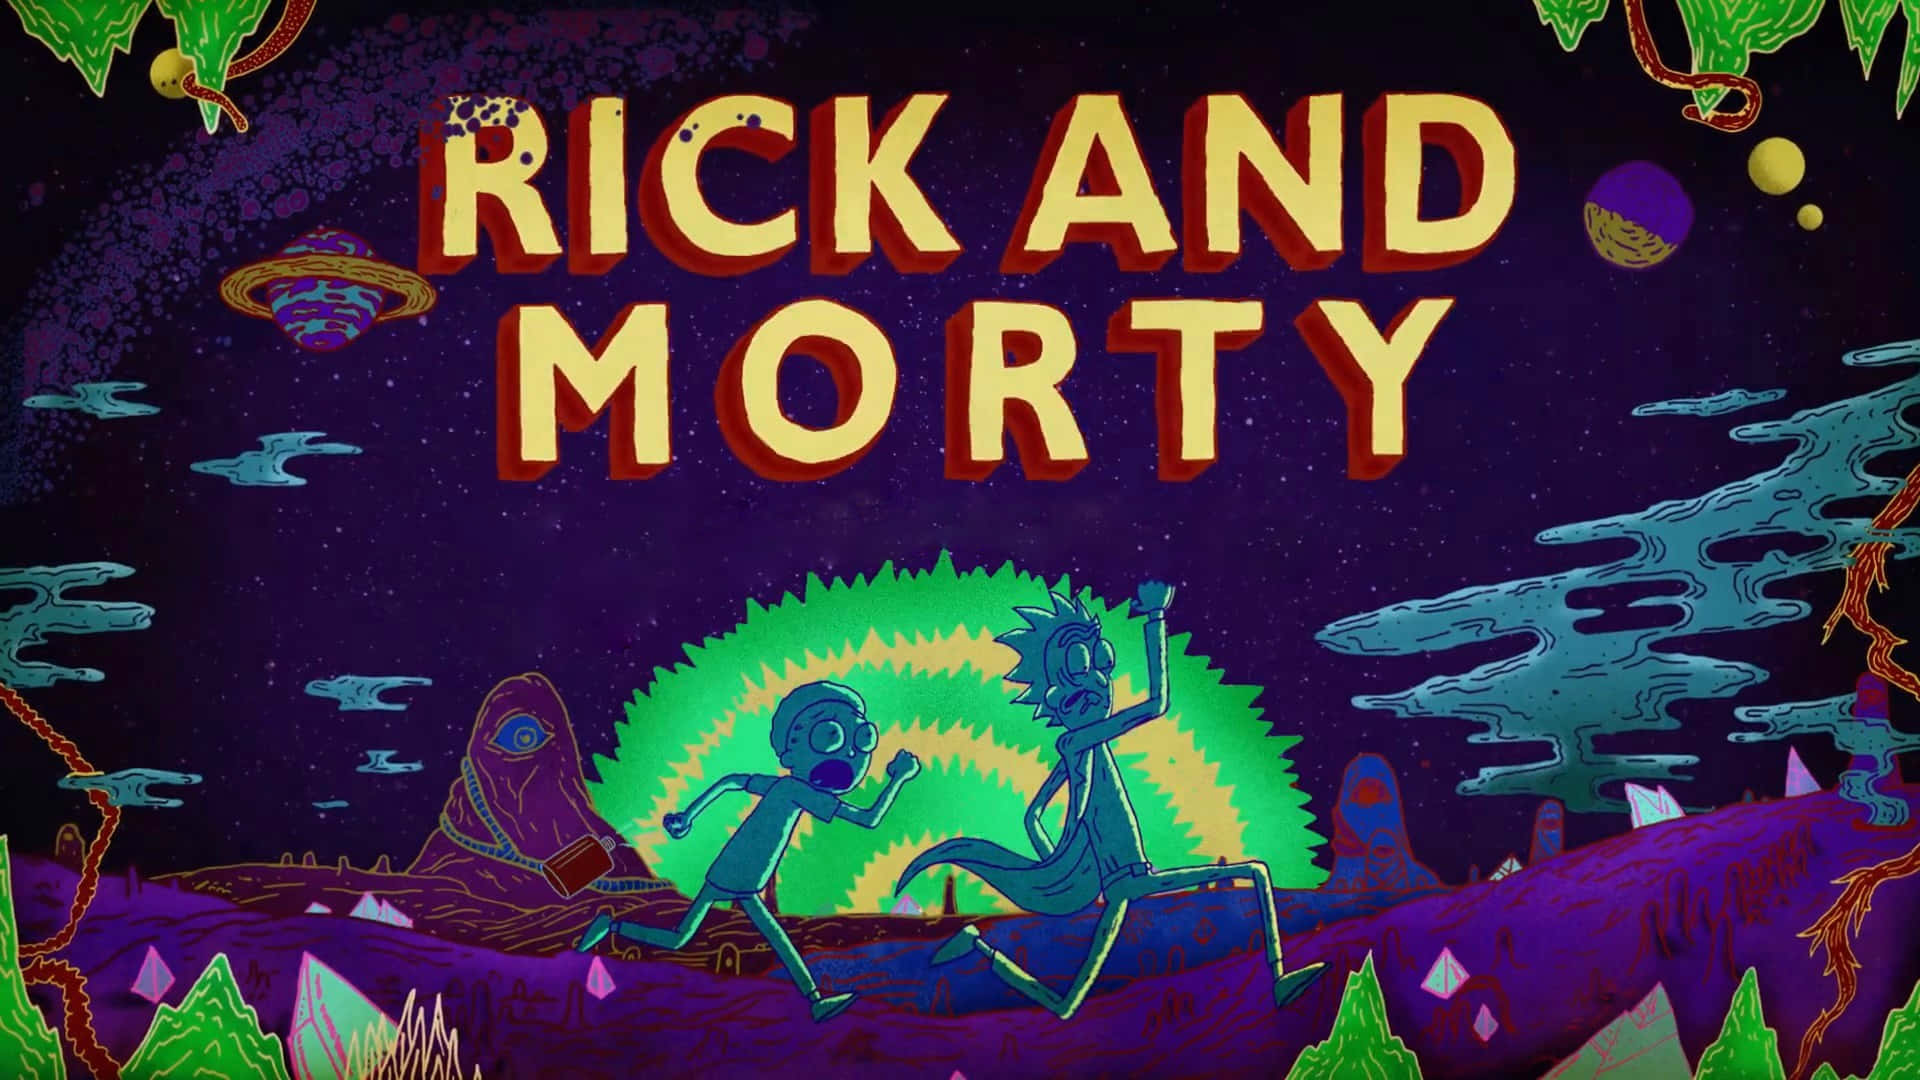 "Rick and Morty Decal on a Laptop" Wallpaper